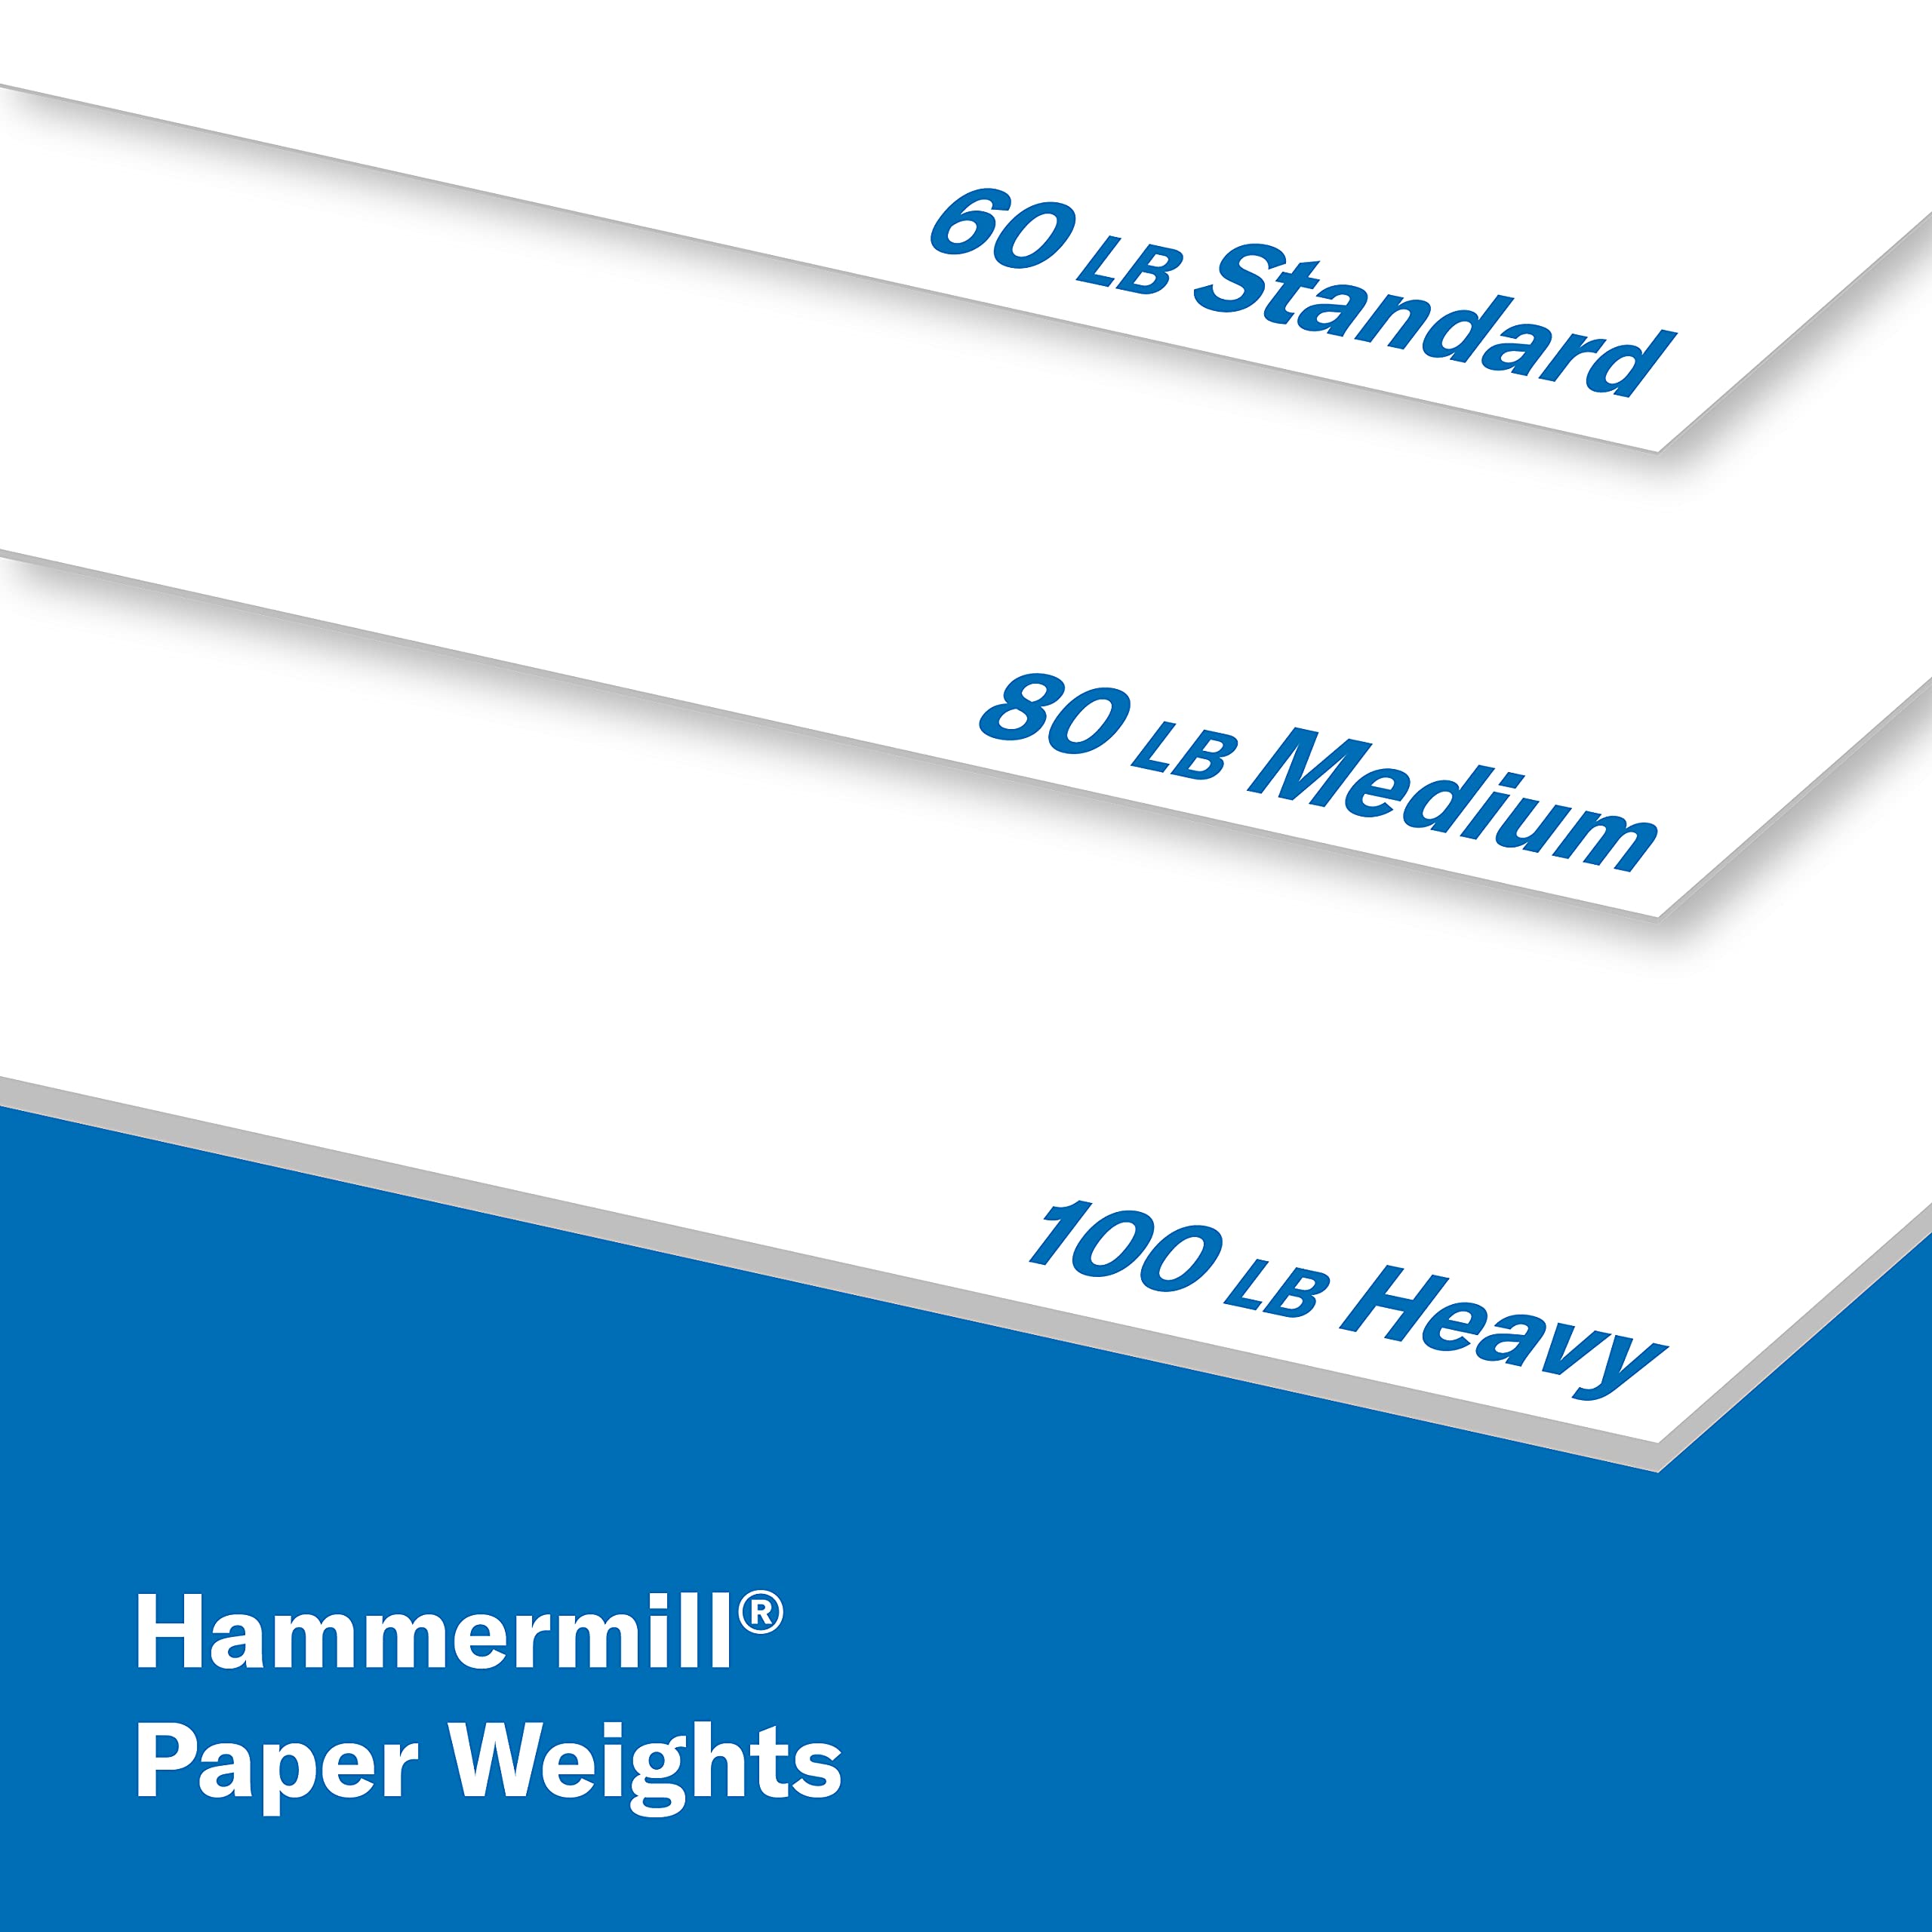 Hammermill Cardstock, Premium Color Copy, 100 lb, 18 x 12-3 Pack (750 Sheets) - 100 Bright, Made in the USA Card Stock, 133201C